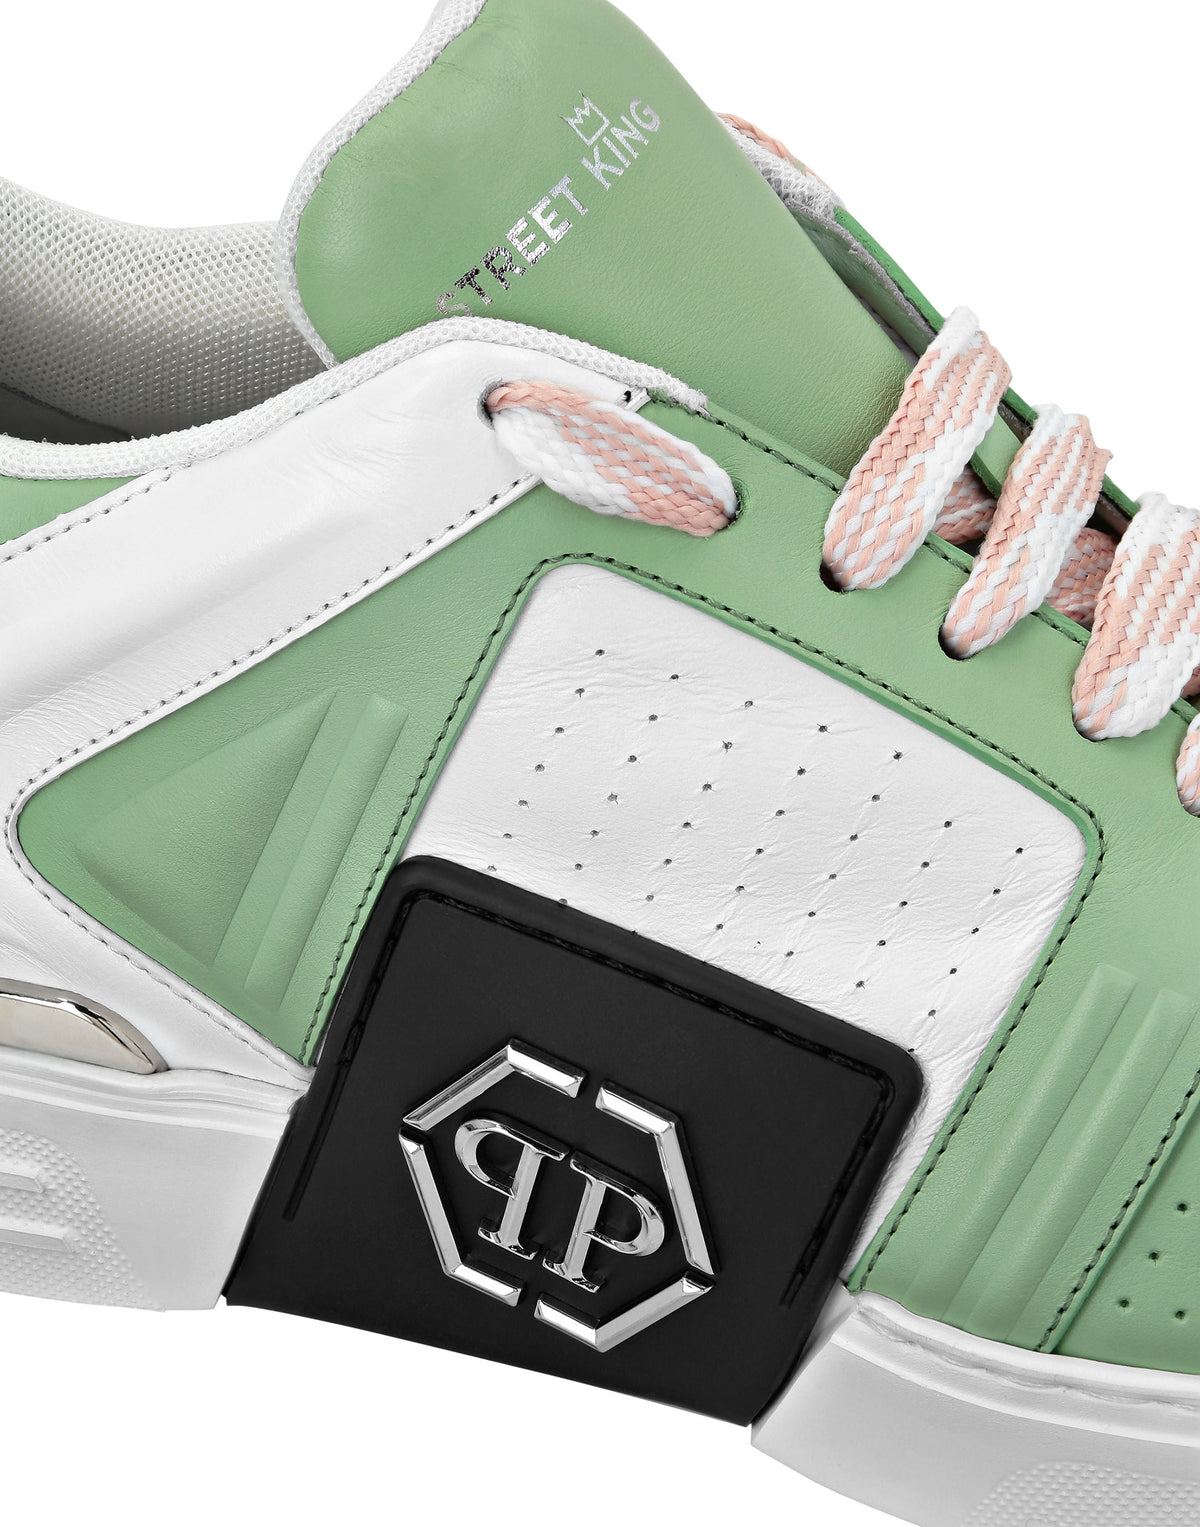 Leather Lo-Top Sneakers Hexagon pink+green